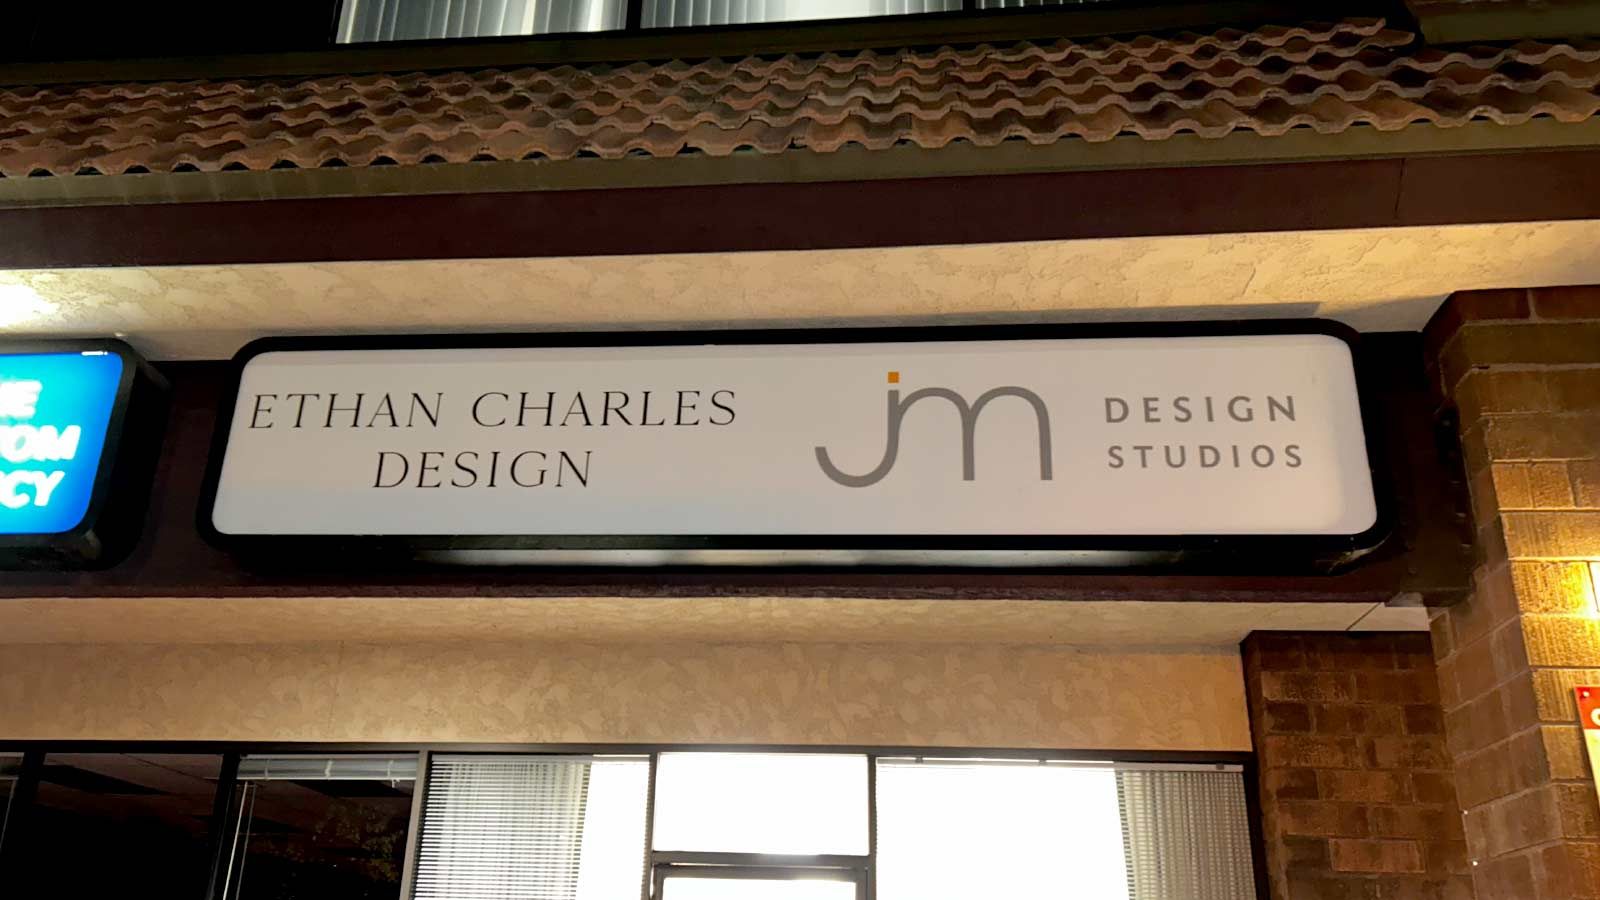 Ethan Charles Design light up sign face replacement